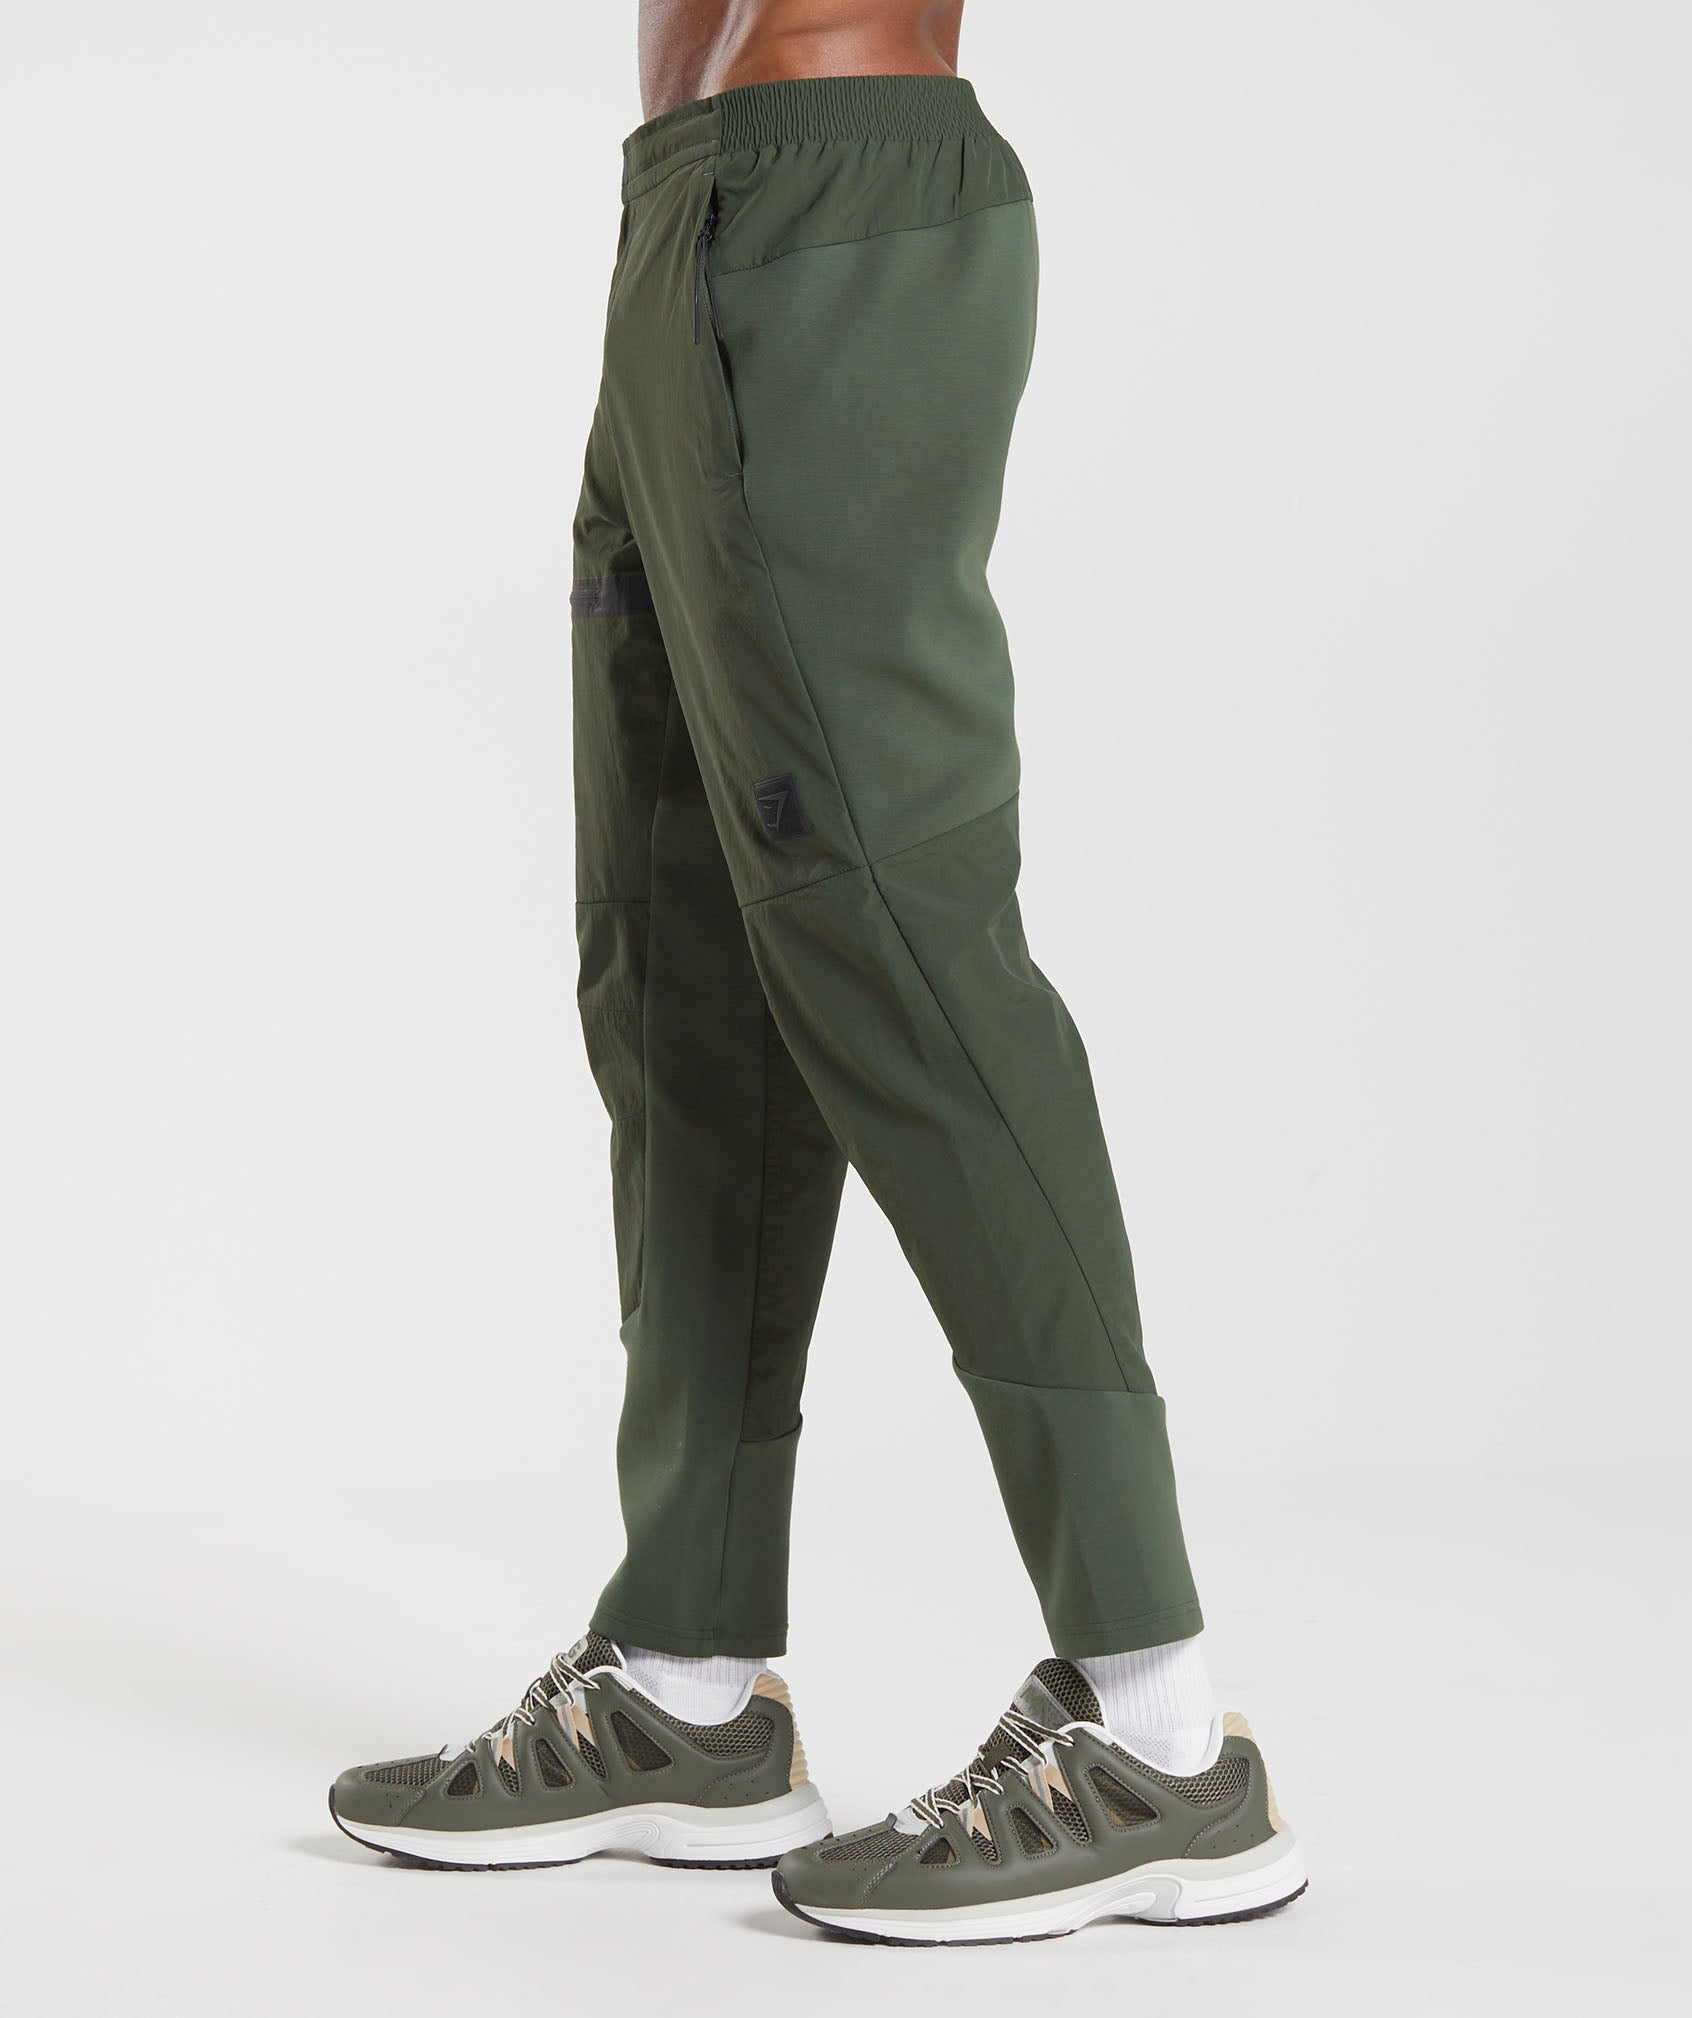 Retake Woven Joggers in Moss Olive